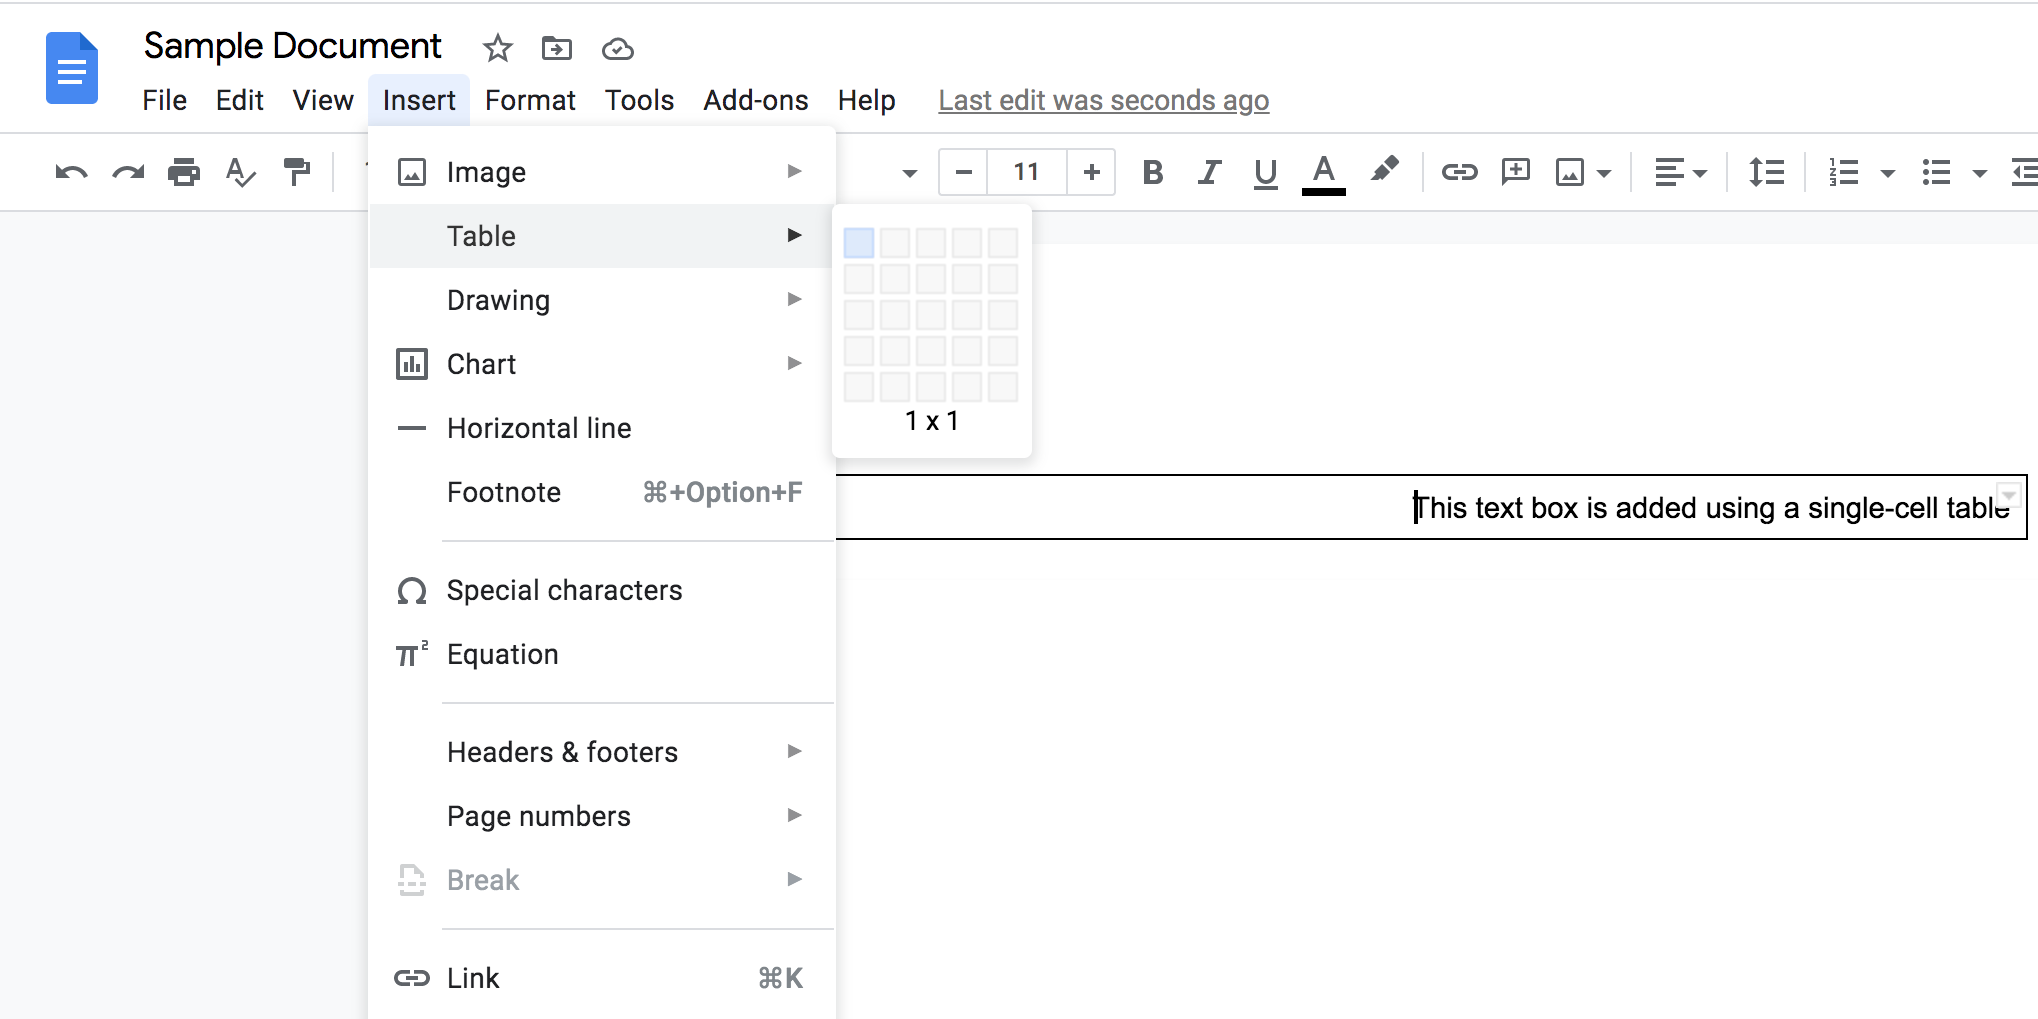 can you insert a text box in google docs